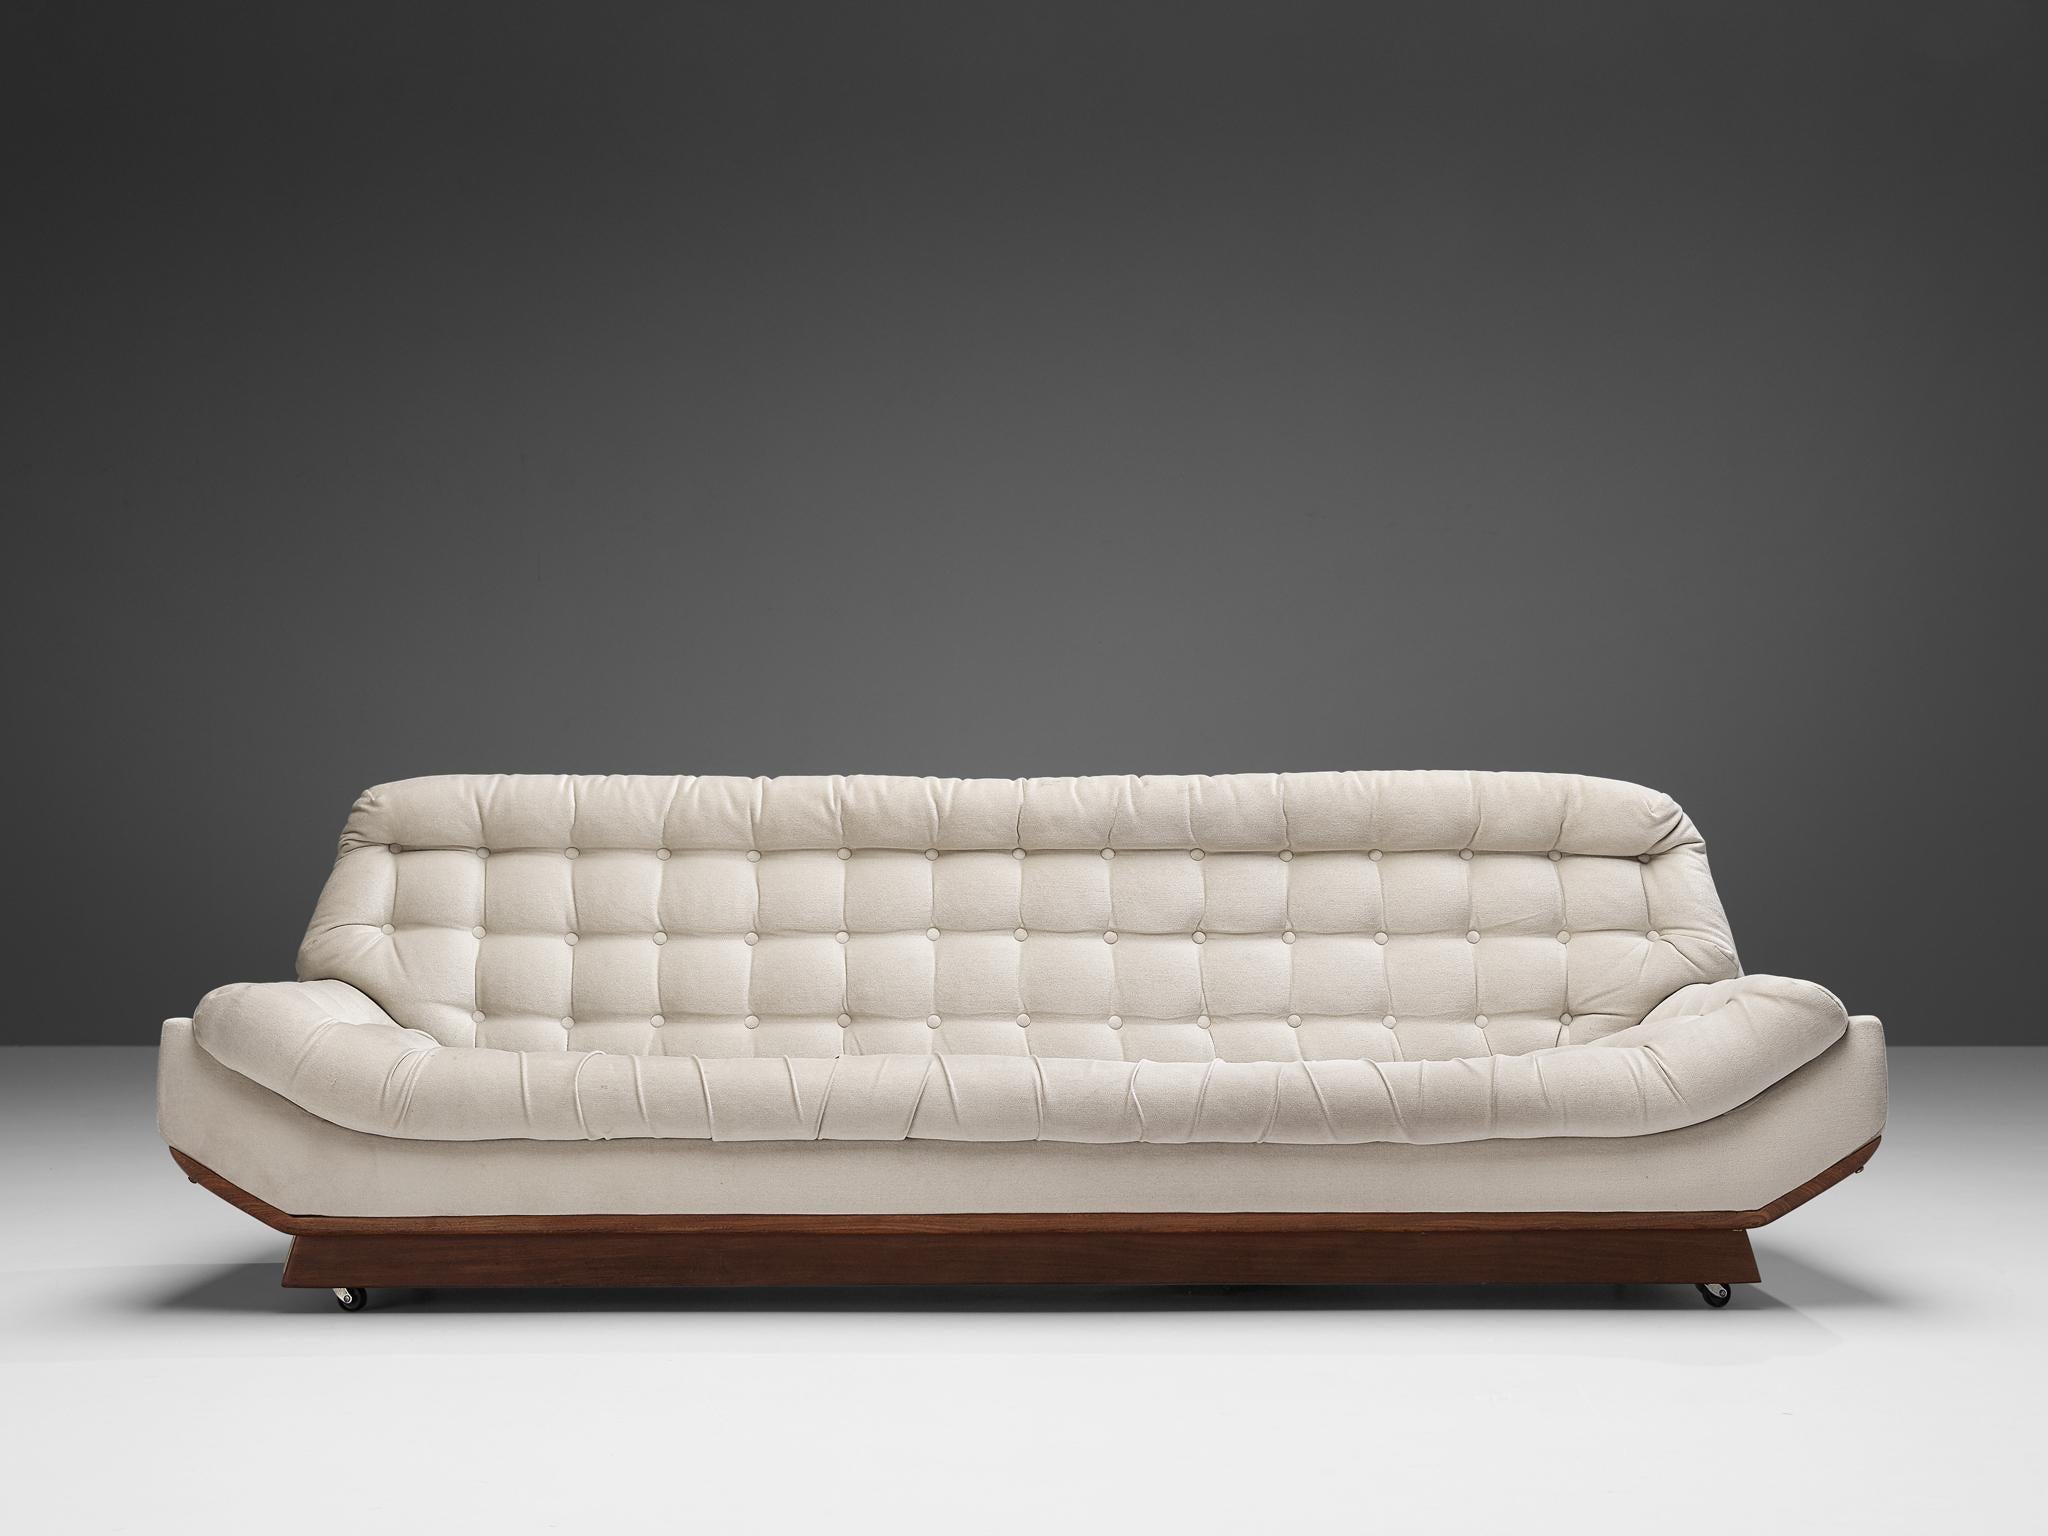 Italian Sofa with White Tufted Upholstery 1